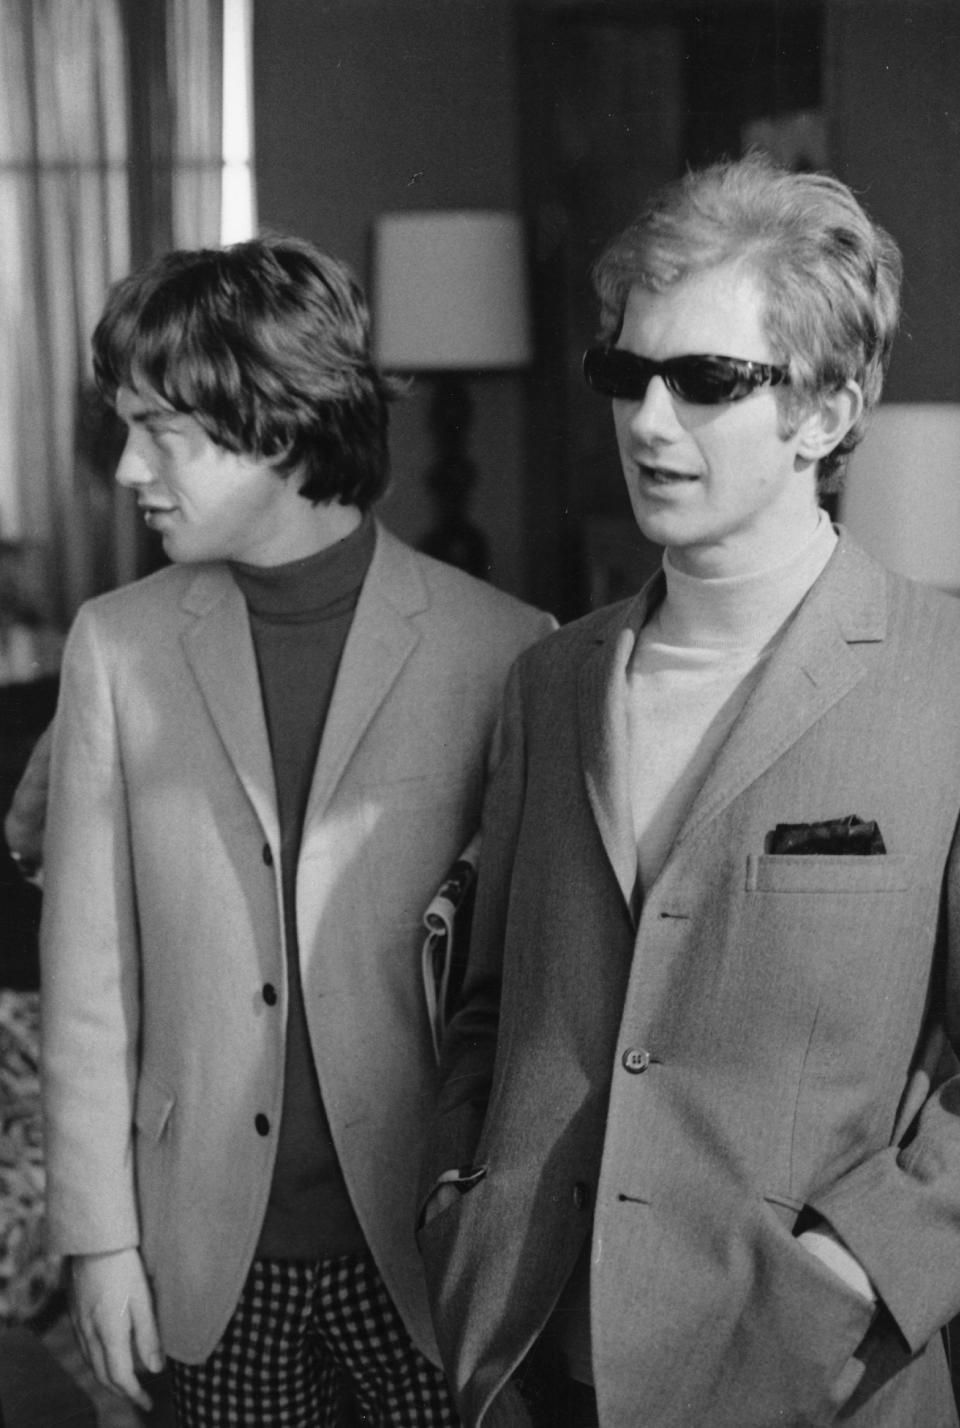 Mick Jagger and Rolling Stones manager Andrew Loog Oldham rocking a pair of smart three-button jackets in 1965.